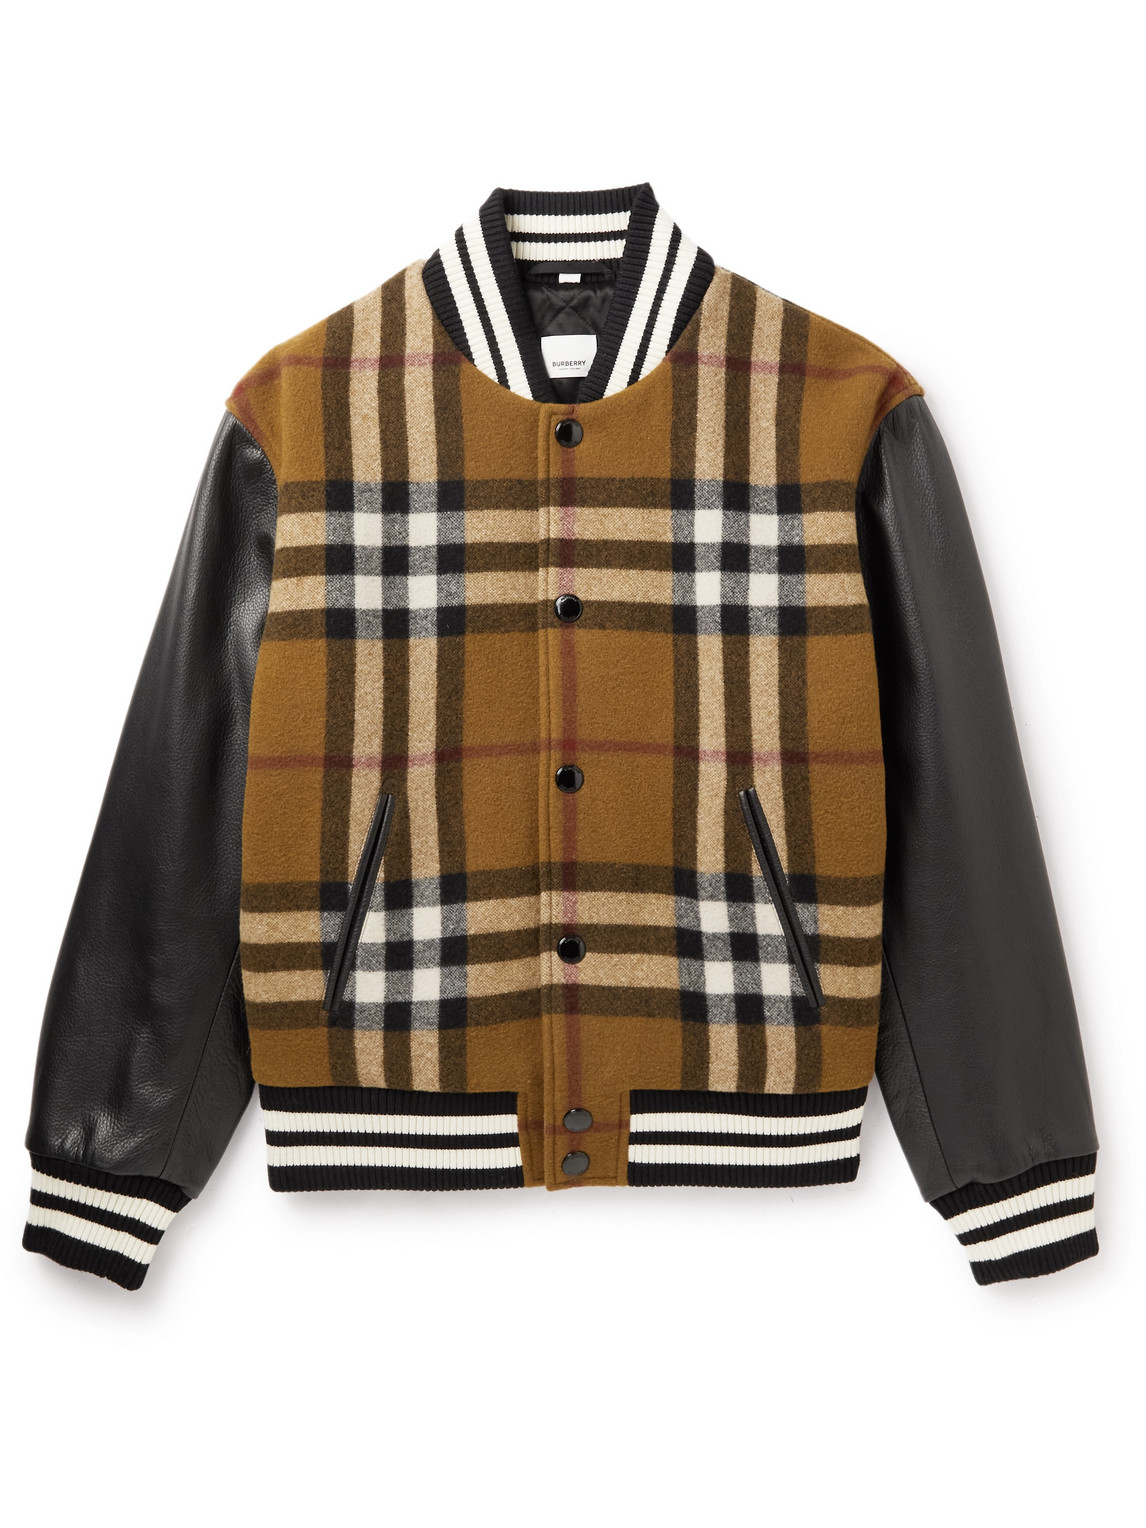 Burberry - Checked Wool-Blend and Full-Grain Leather Varsity Jacket - Men - Brown - IT 46 von Burberry